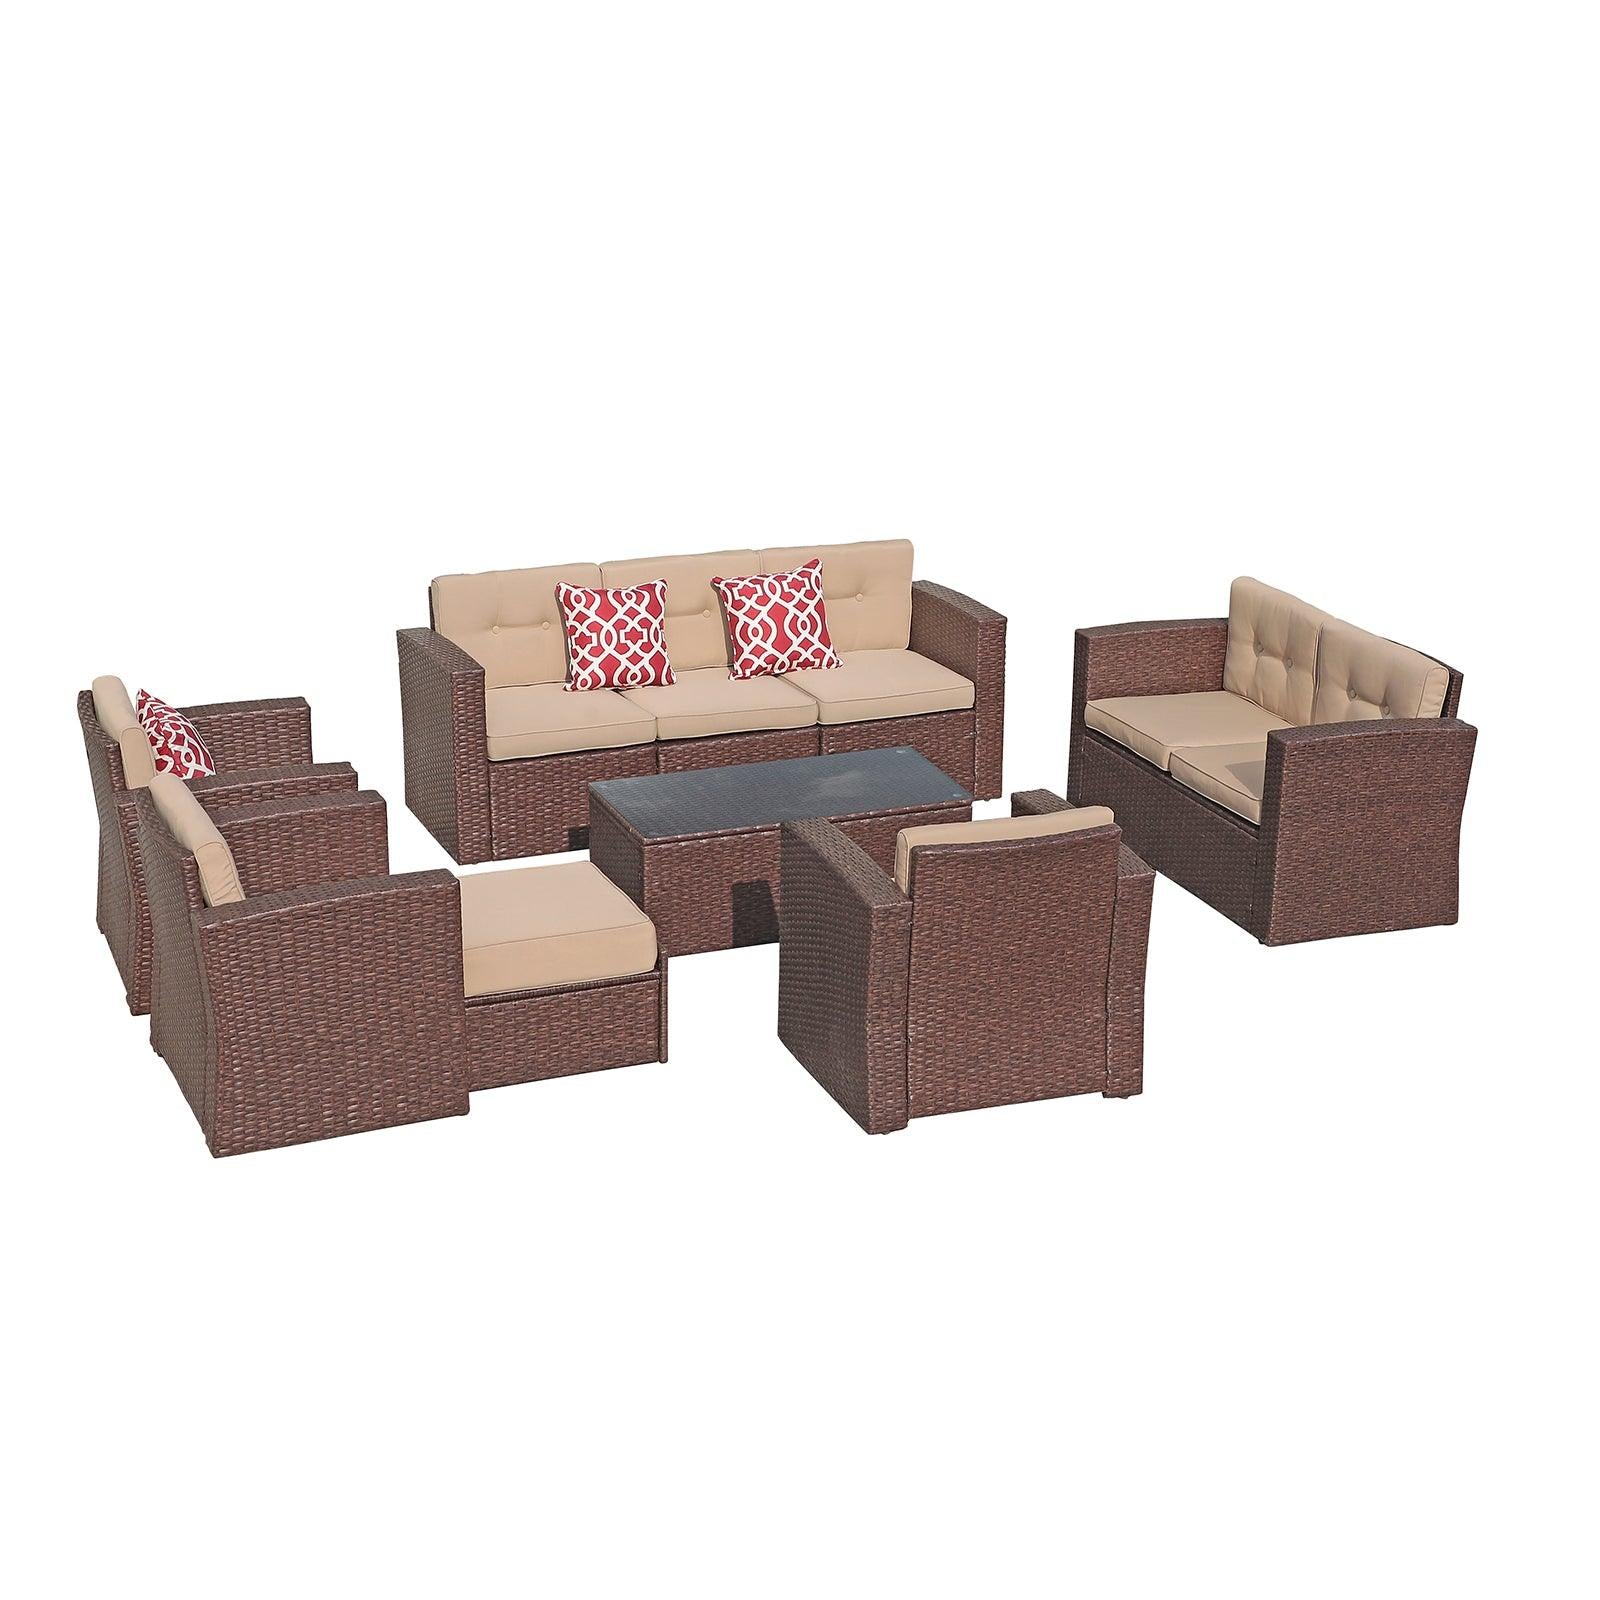 10pcs Outdoor Sectional Set Wicker Patio Furniture Set with Beige Cushions | Orange-Casual